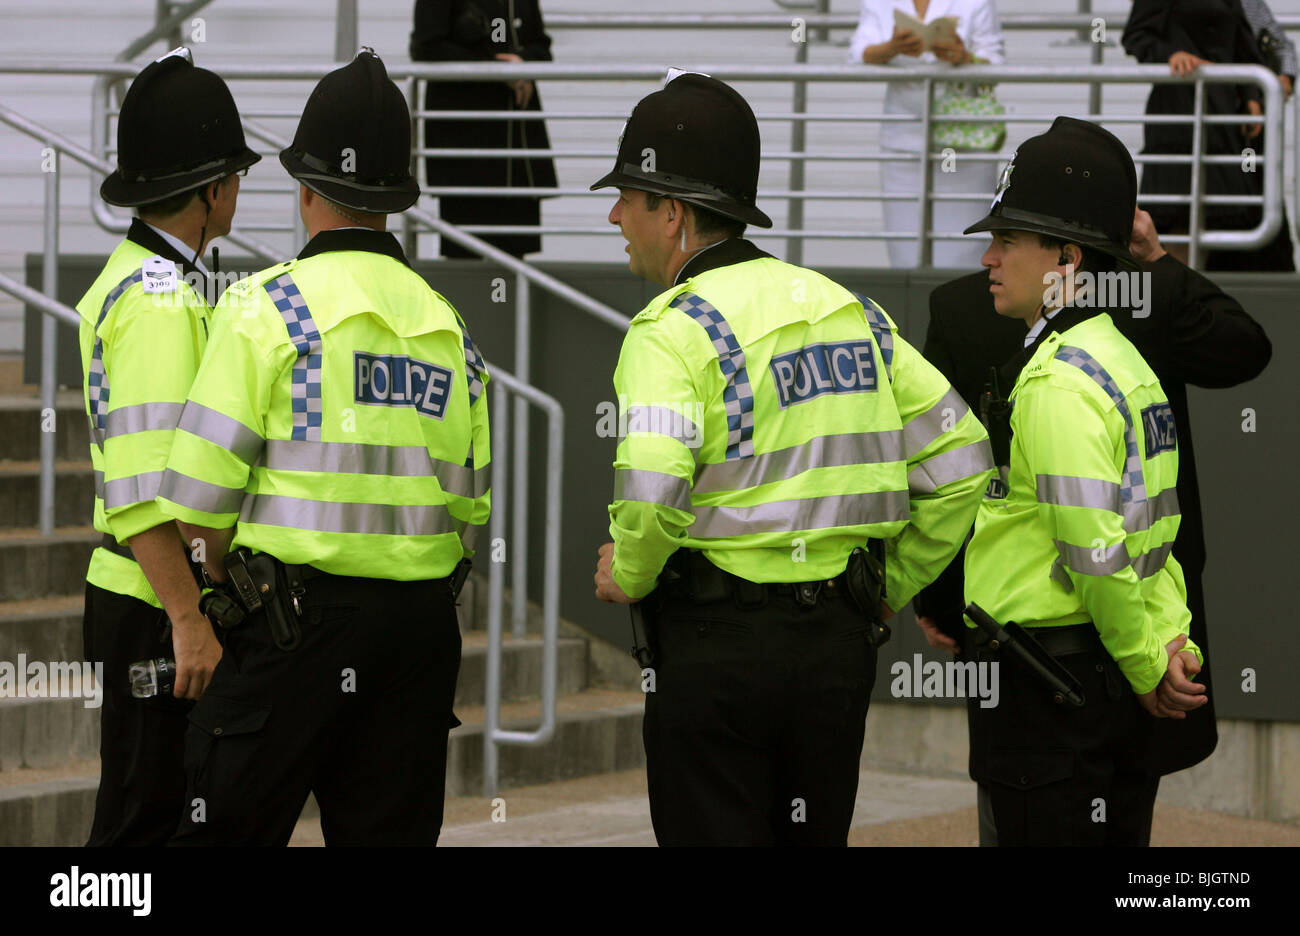 Policemen at the Royal Ascot horse races, Great Britain Stock Photo